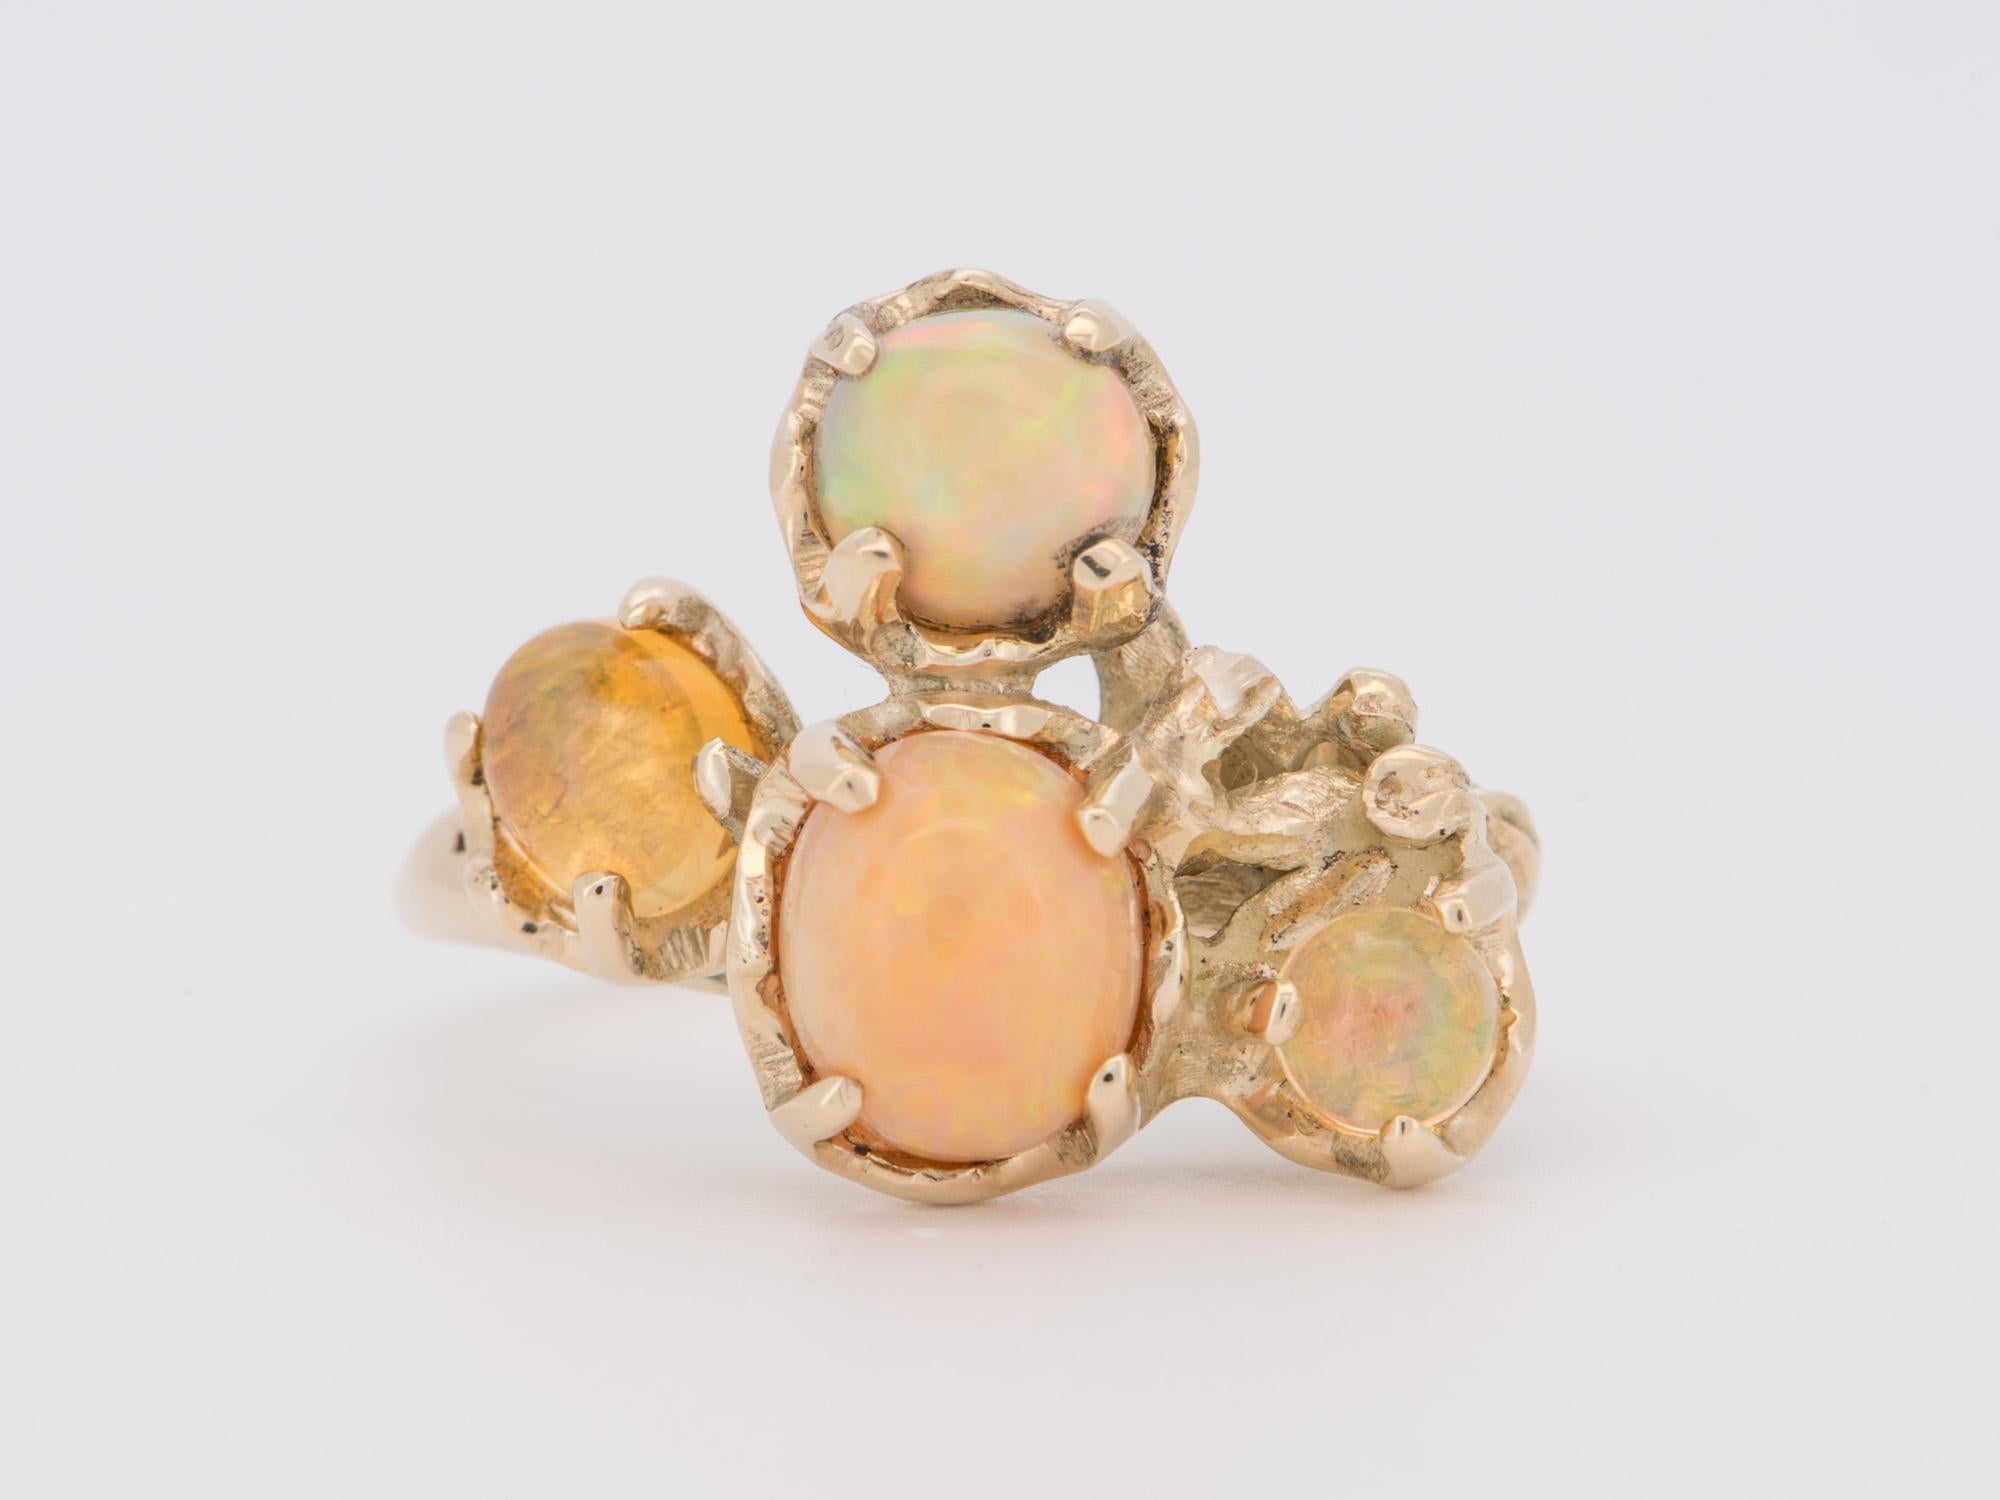 ♥ Mexican Fire Opal Organic Branch Ring 14K Gold
♥ The face of the ring measures 21.5mm in width (East West direction), 17.3mm in length (North South direction), and sits 8.8mm tall from the finger. The band is 2.1mm wide.

♥ US size 7 (Free